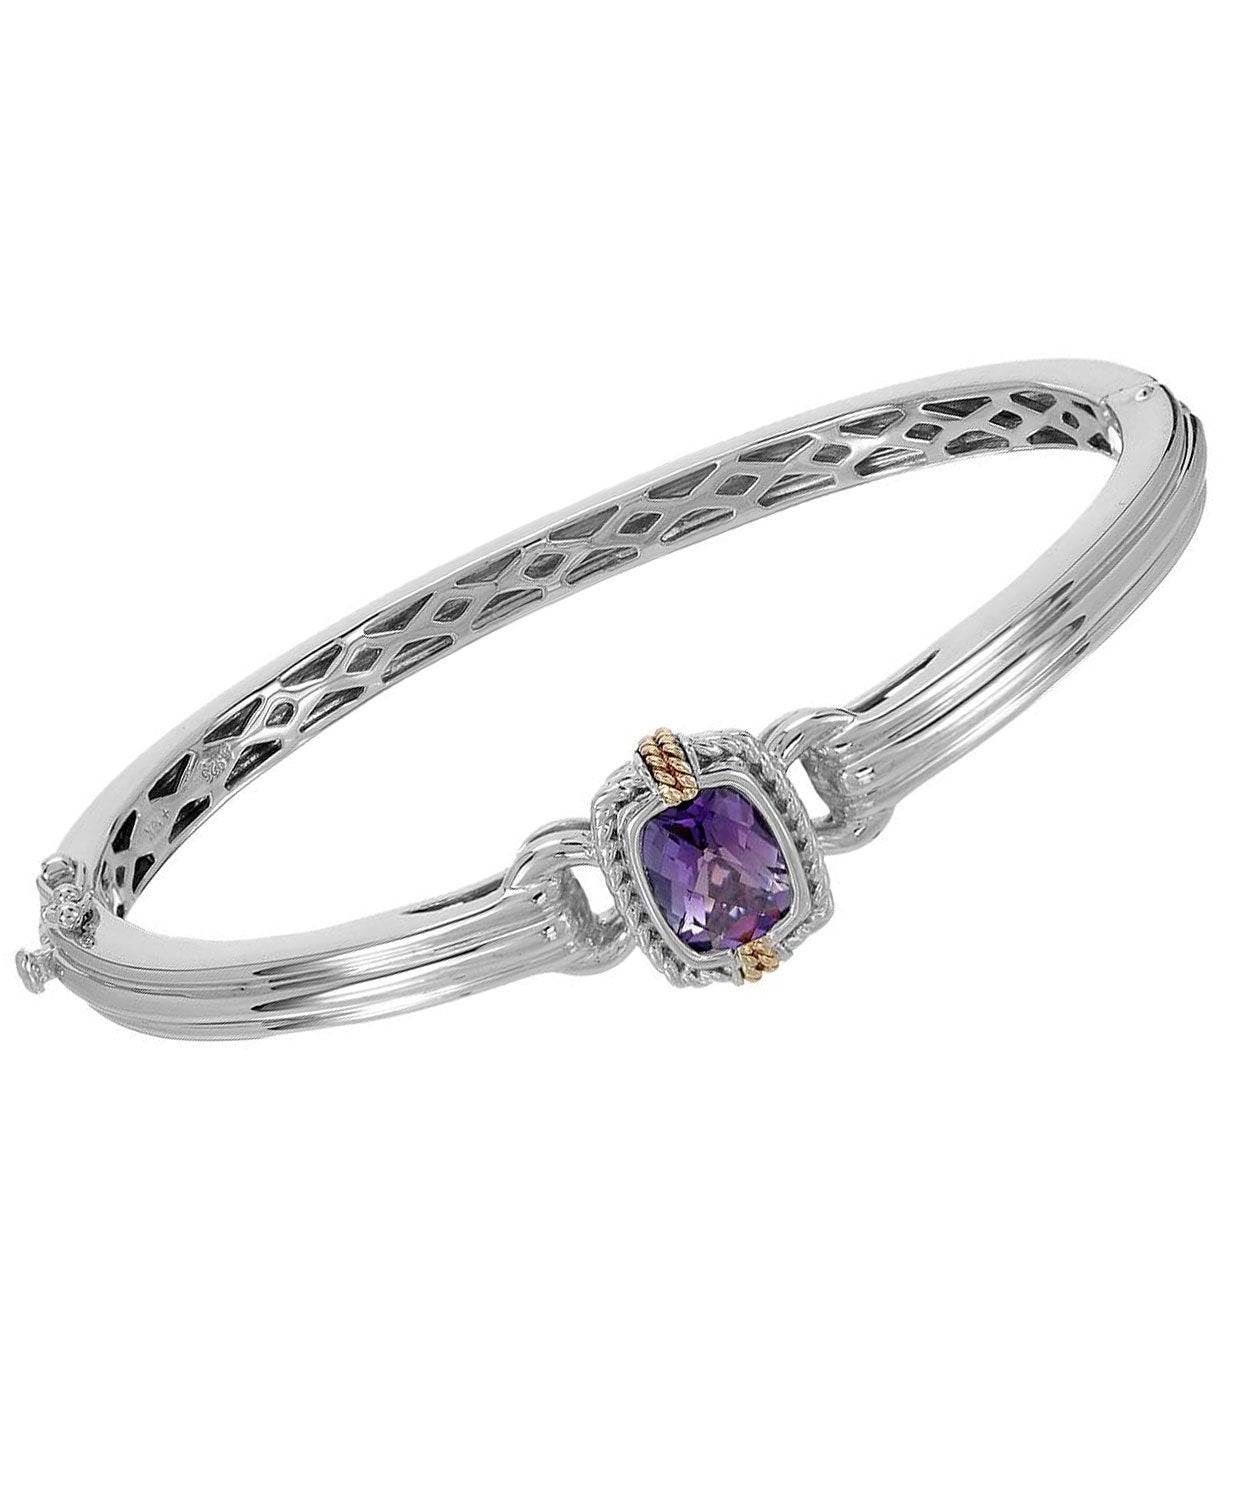 Colore by Simon Golub 2.60 ctw Natural Fine Amethyst 925 Sterling Silver Bangle Bracelet - With 18k Gold Inlay View 1